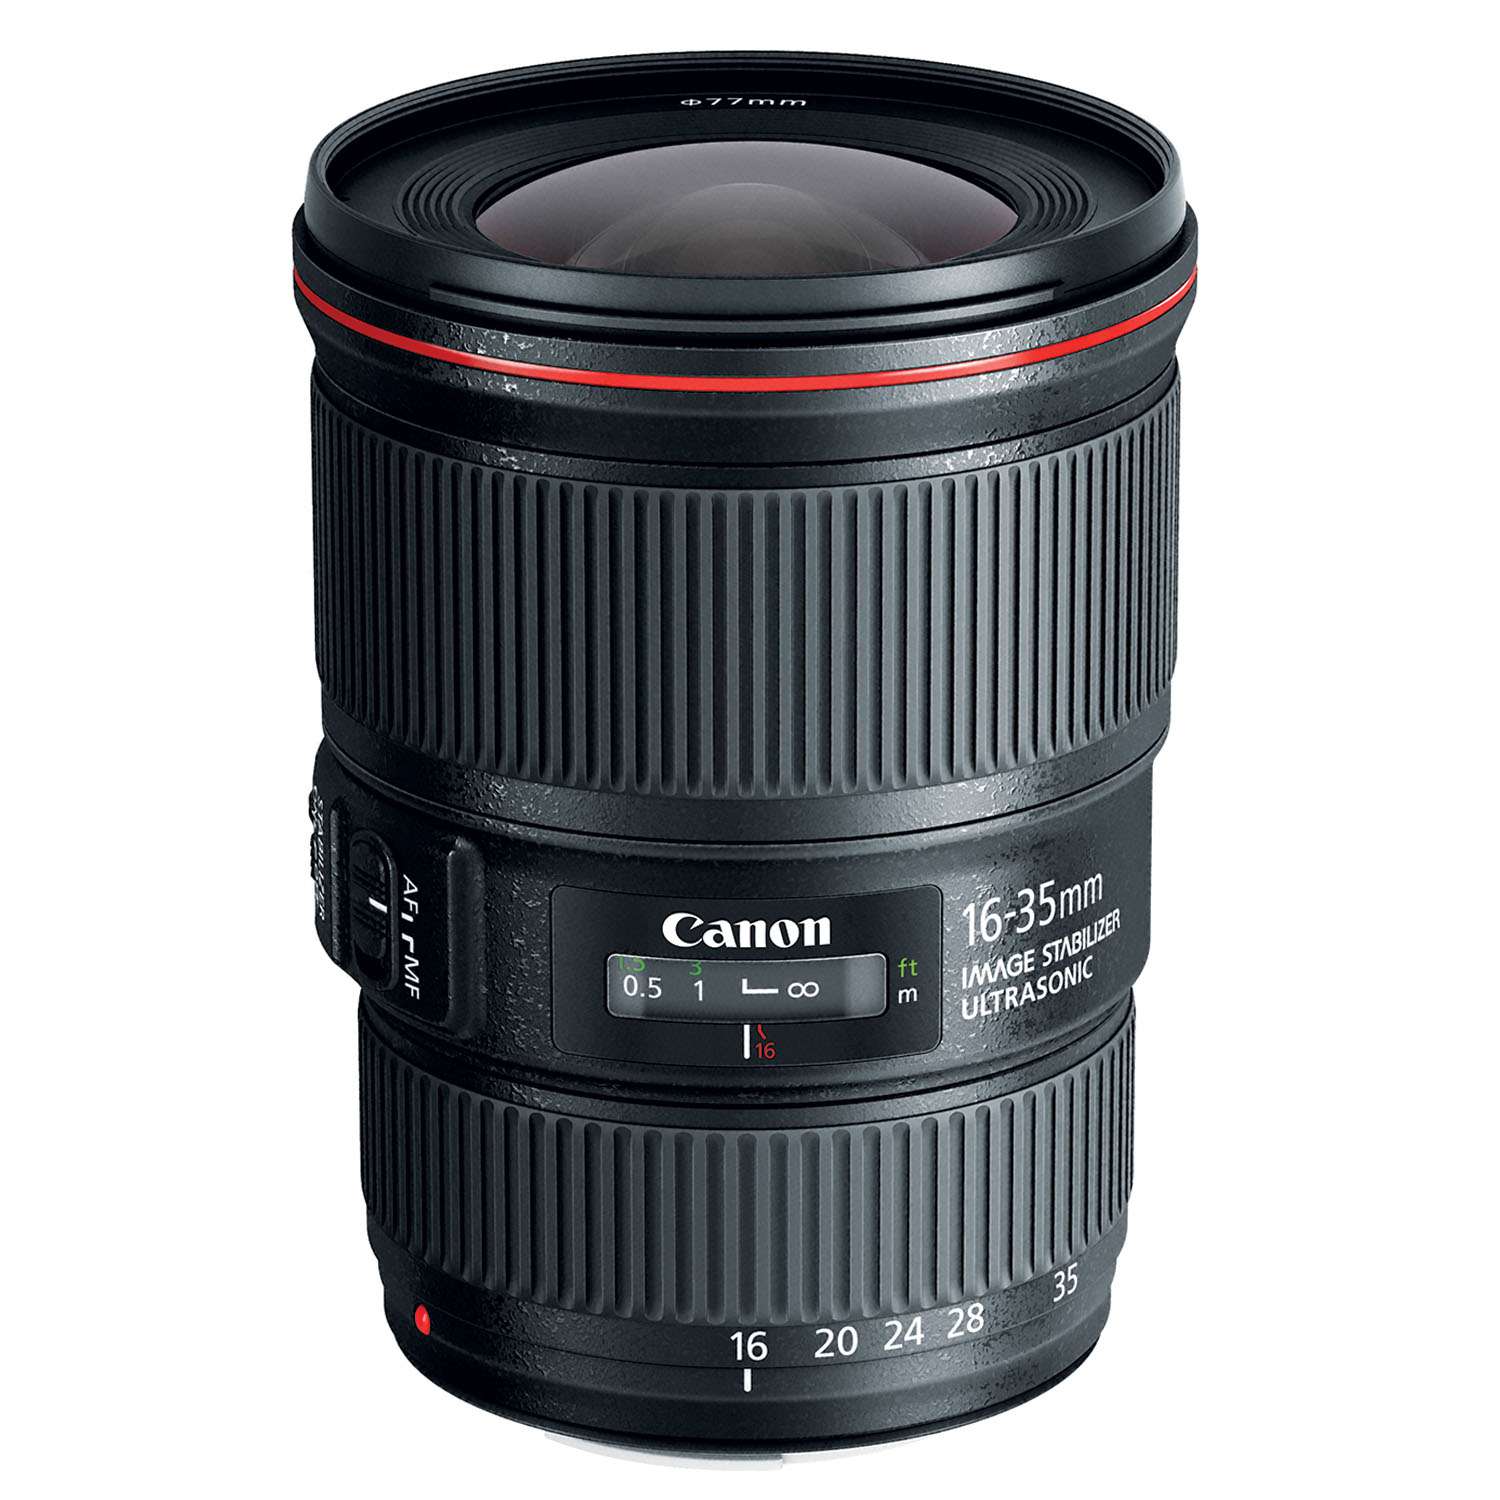 Canon 16-35mm f 4L IS USM